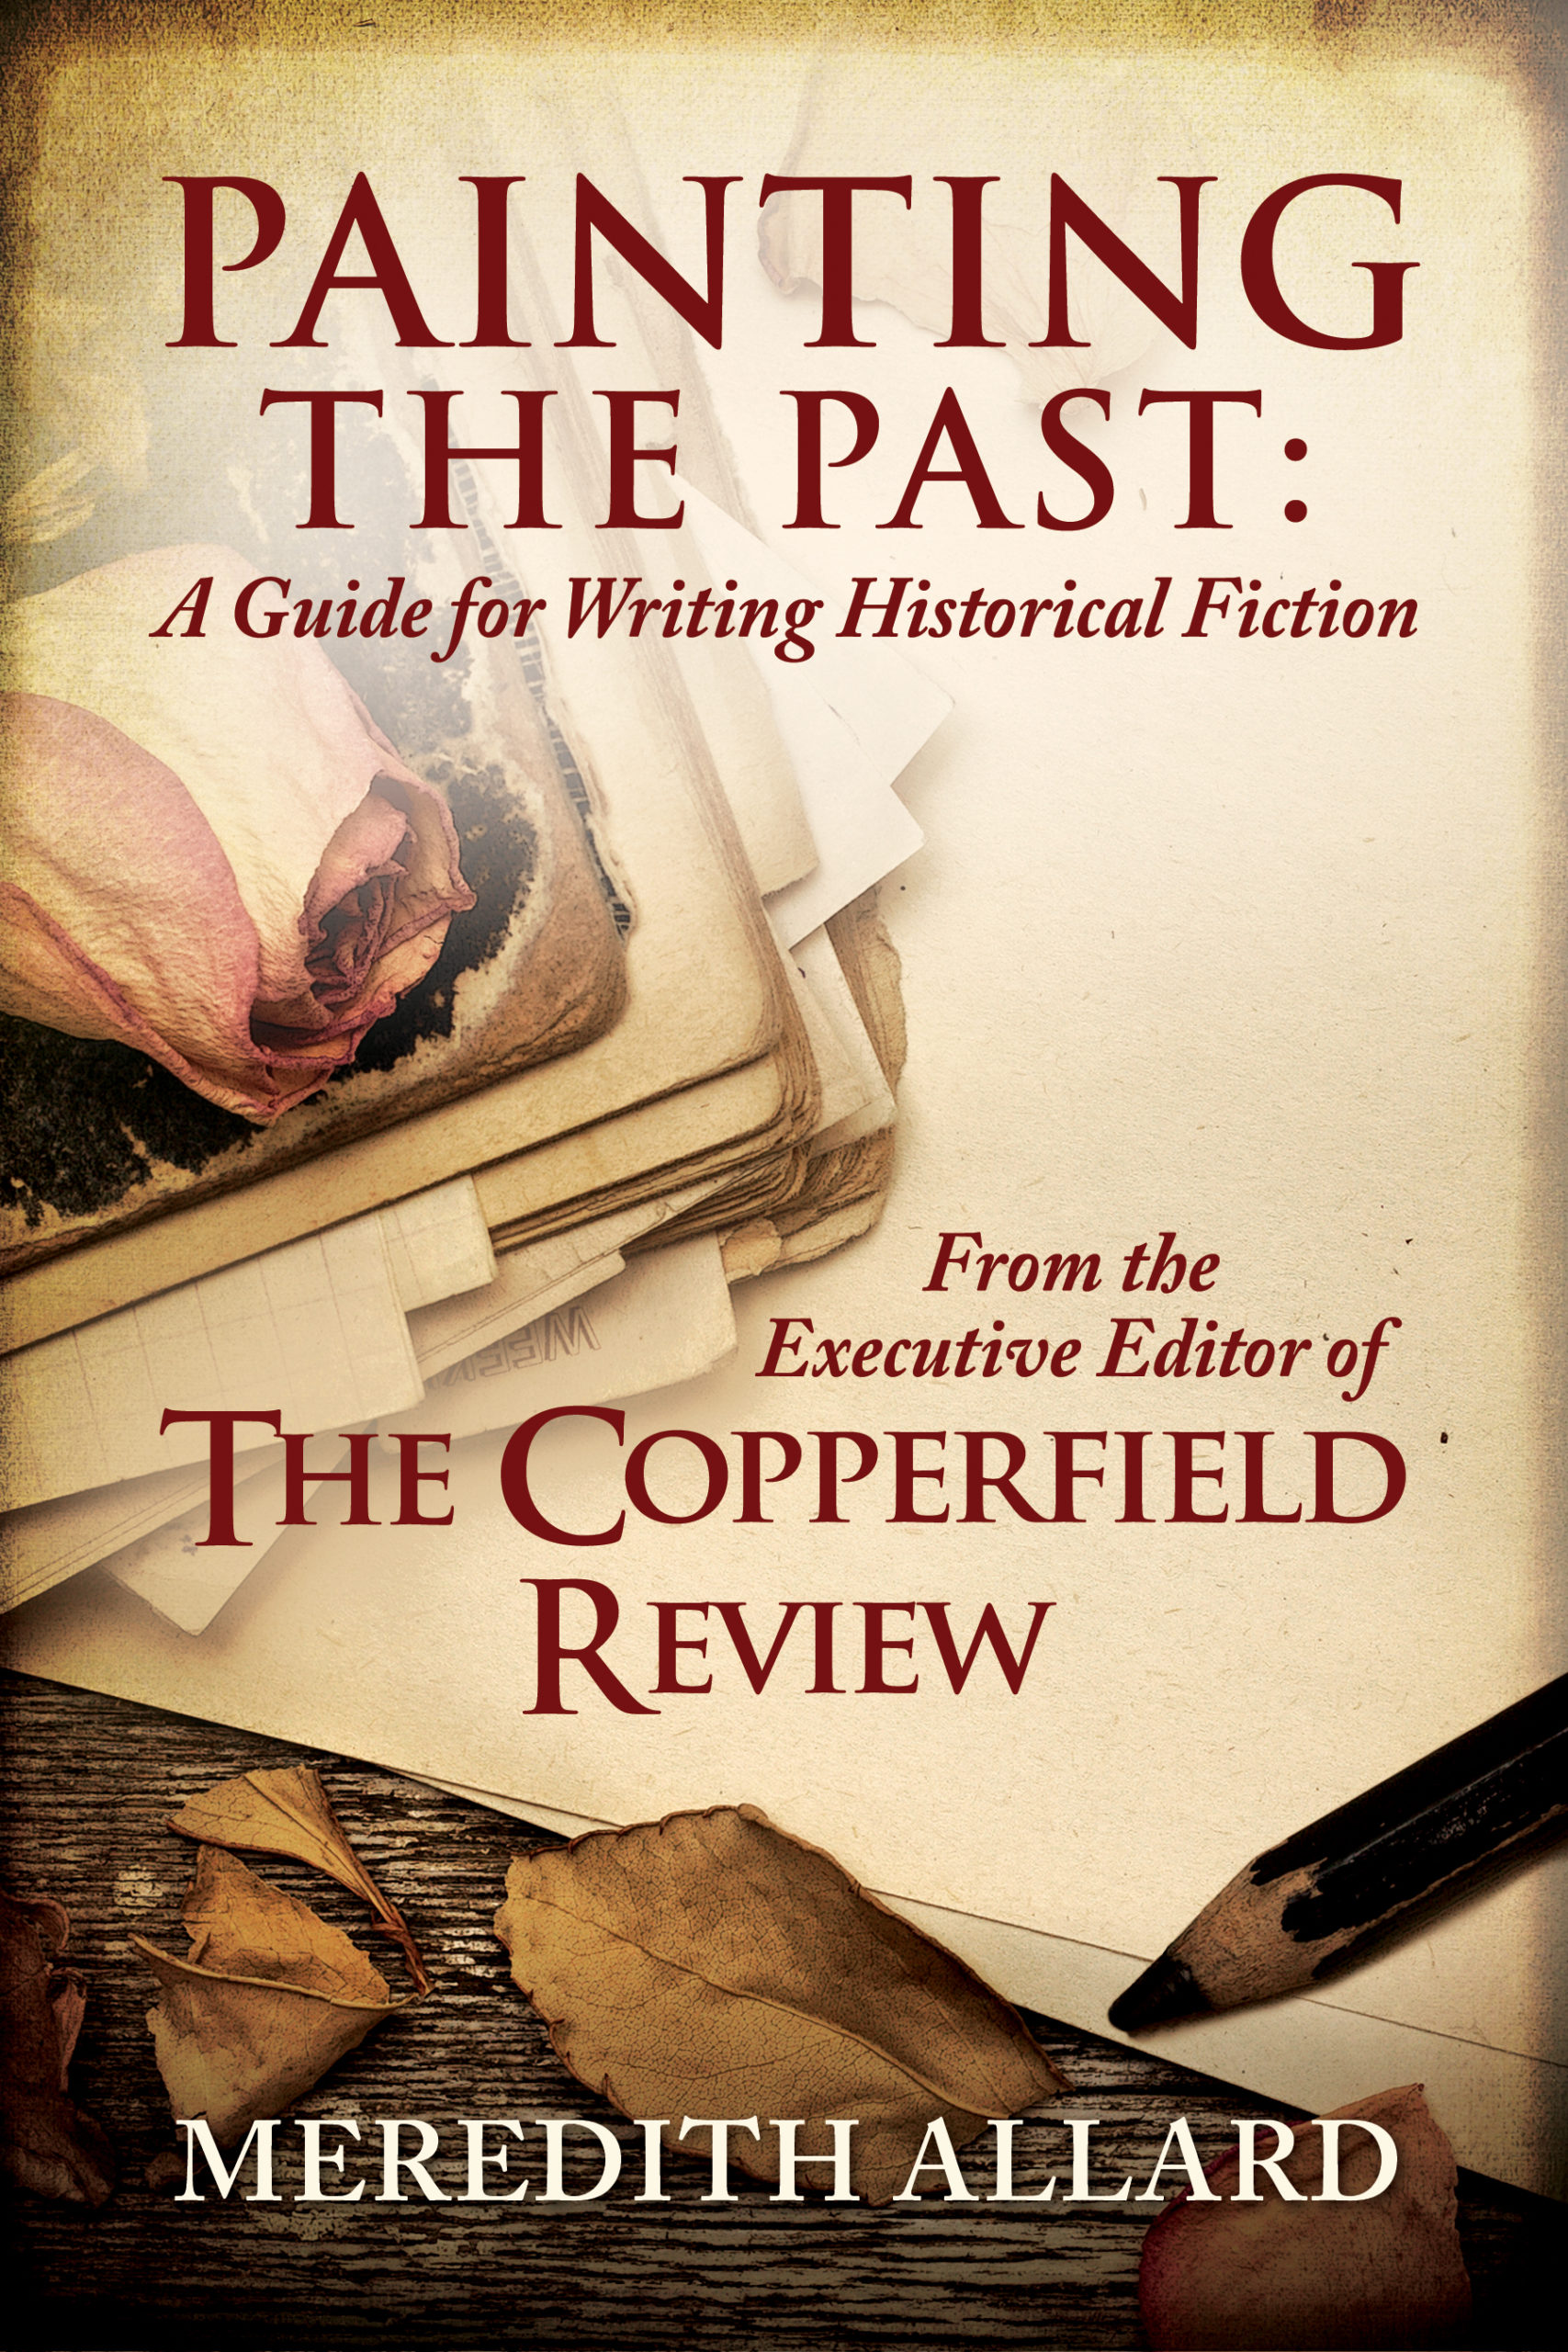 Painting the Past: A Guide for Writing Historical Fiction